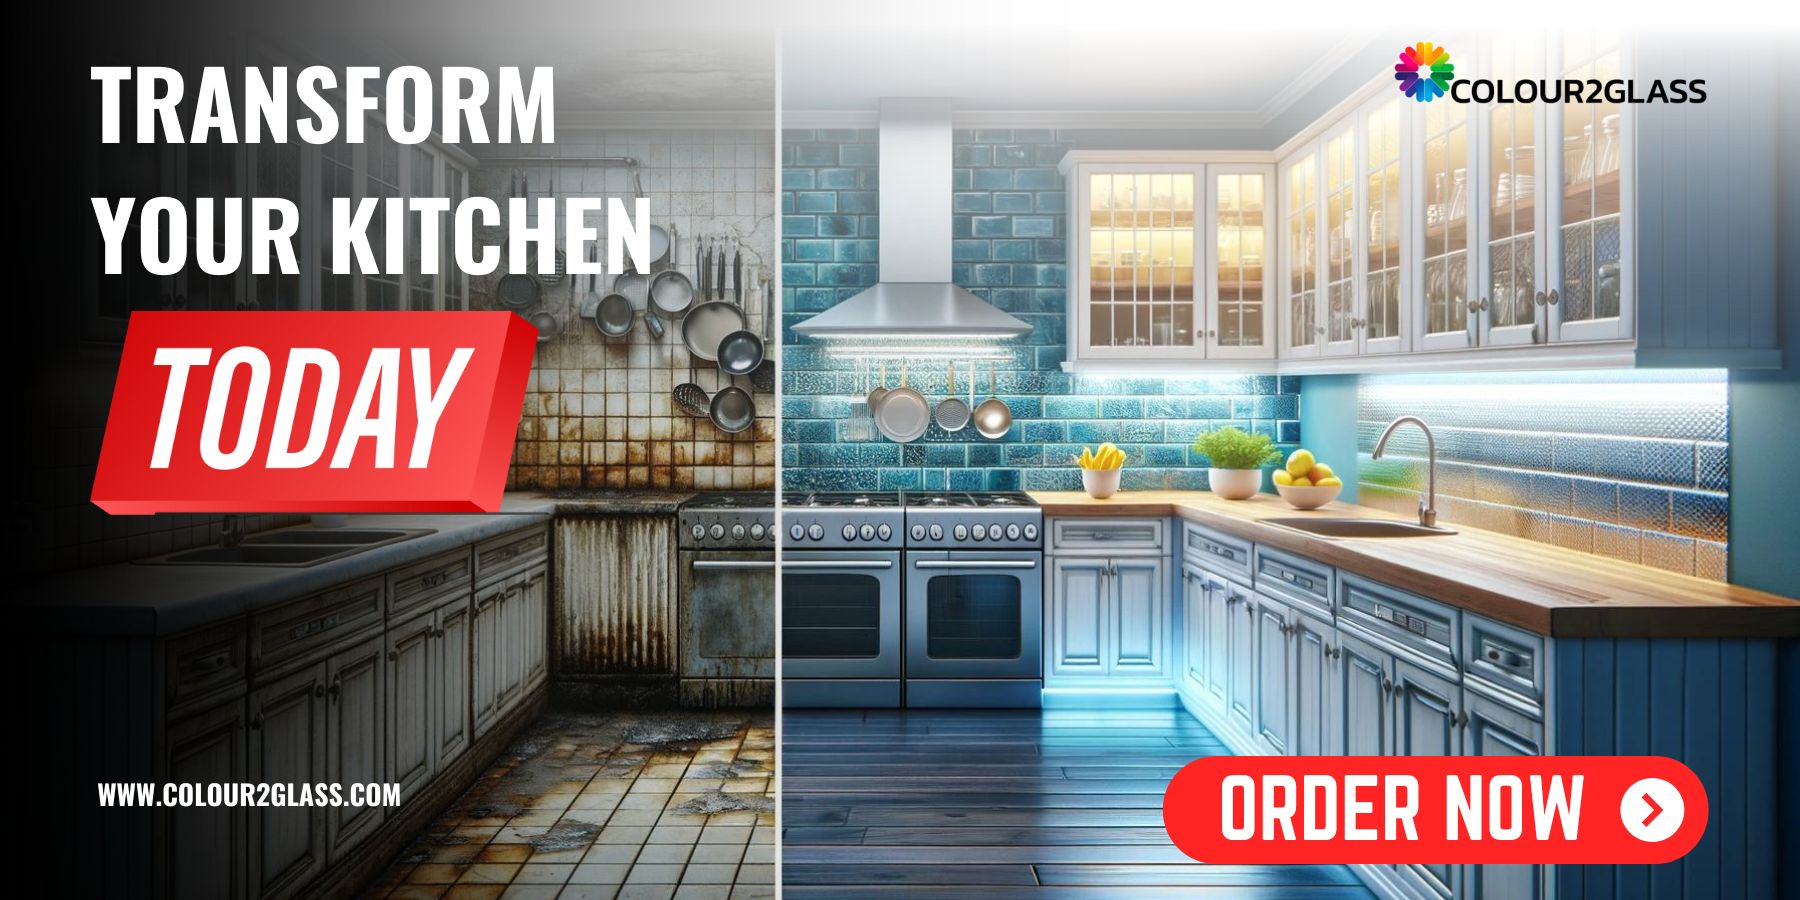 Transform your kitchen today with Auto Draft.